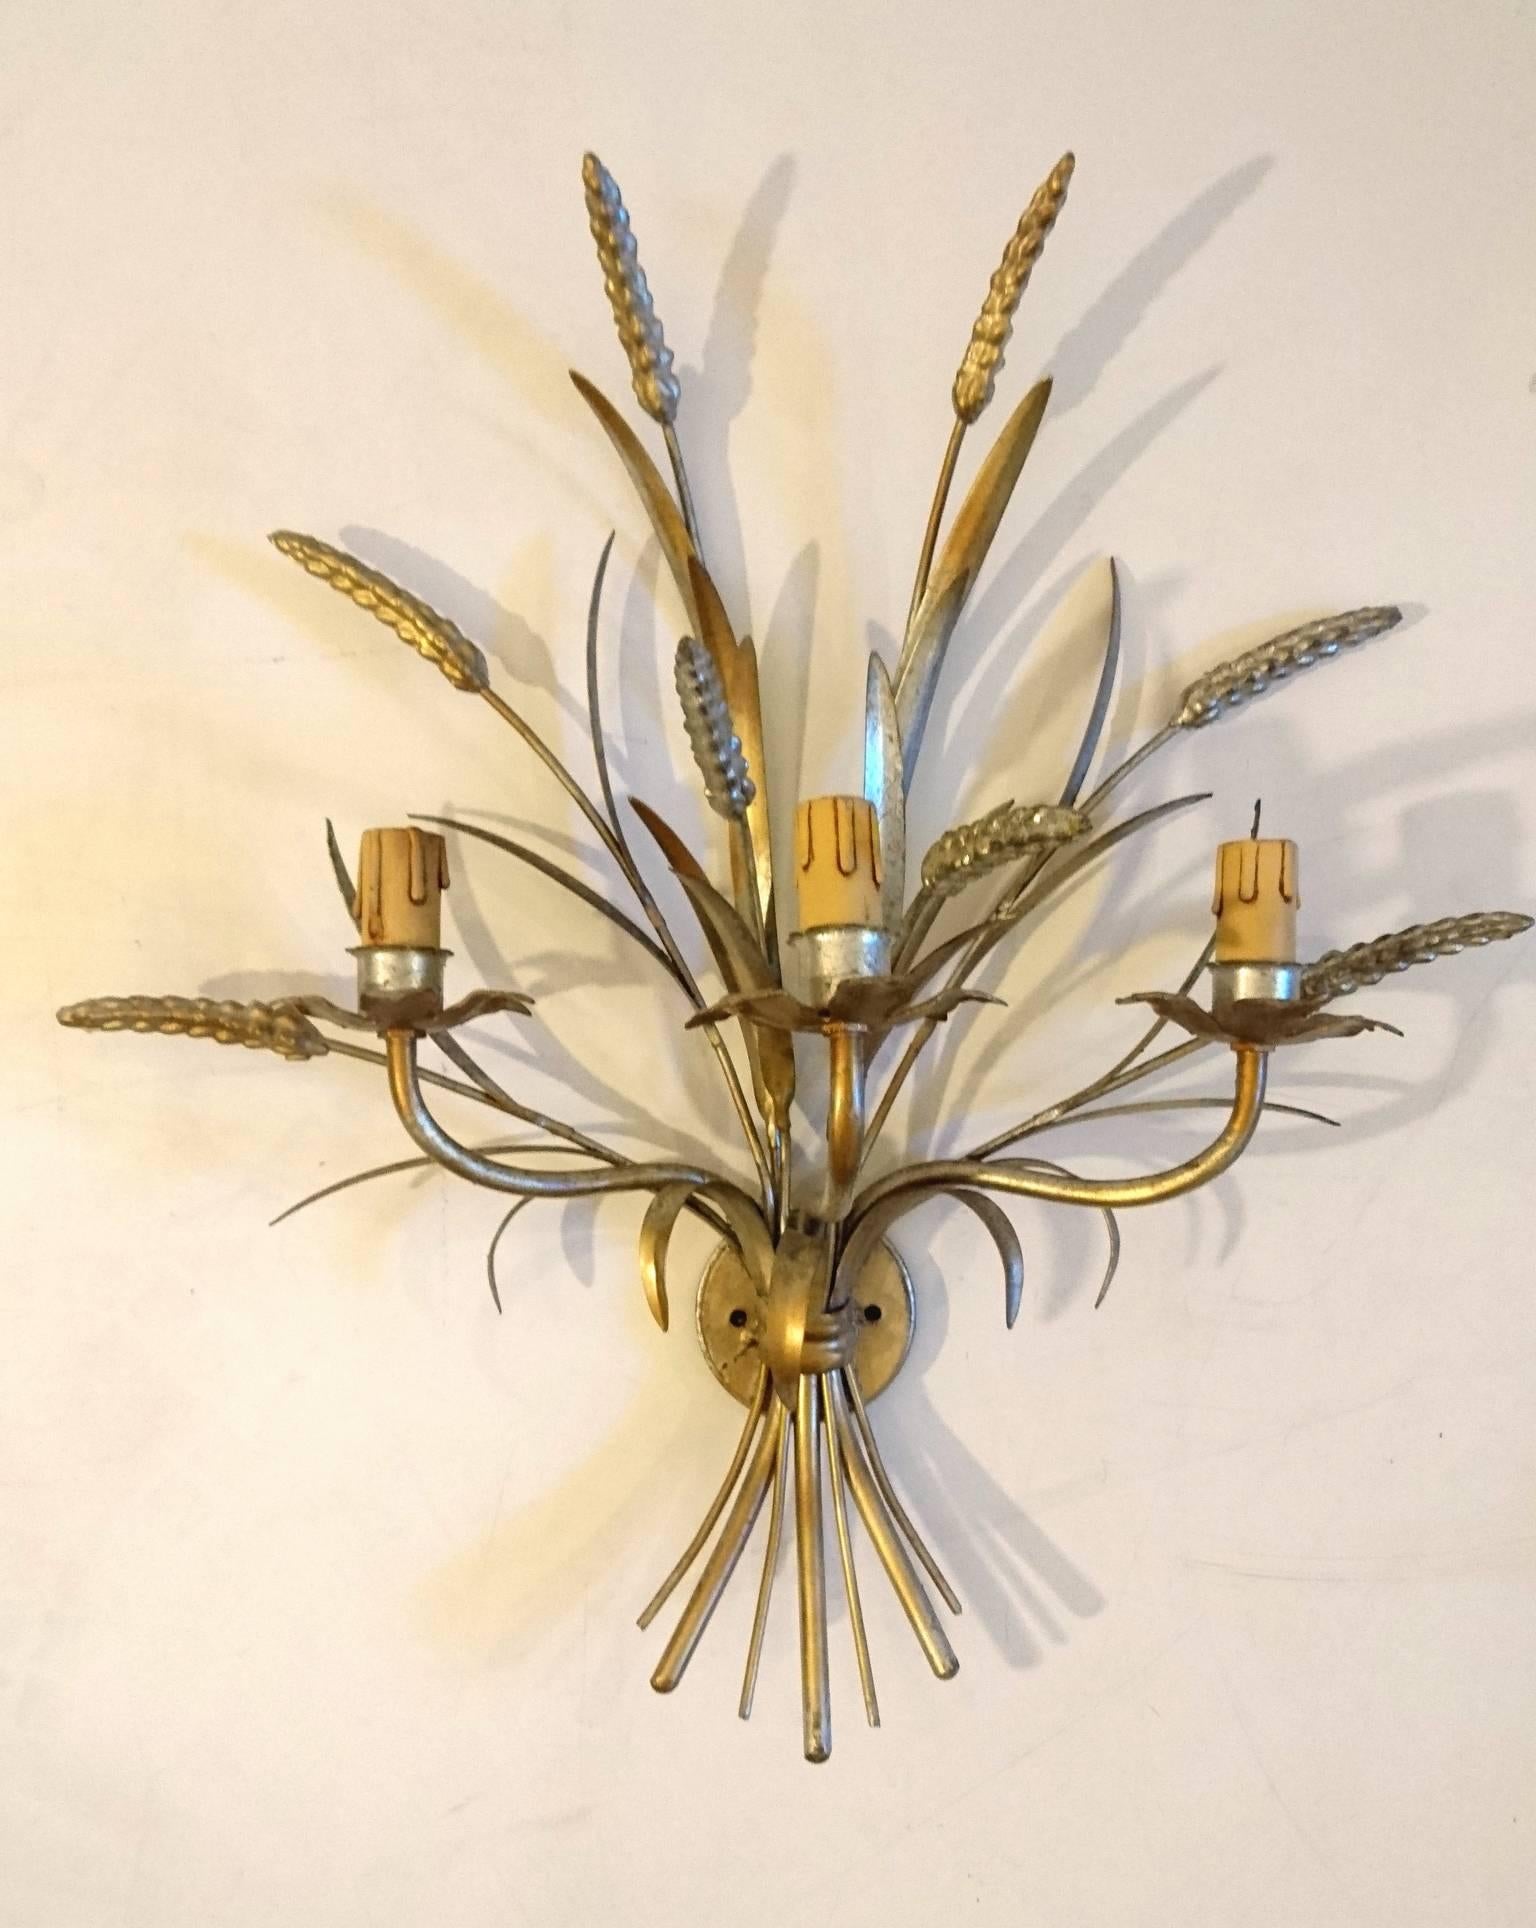 Pair of Italian gilt wheat sheaf sconce with three lights each. In very good condition with gold/silver guilding as well as the original candle covers. They have not been rewired but are in great condition.